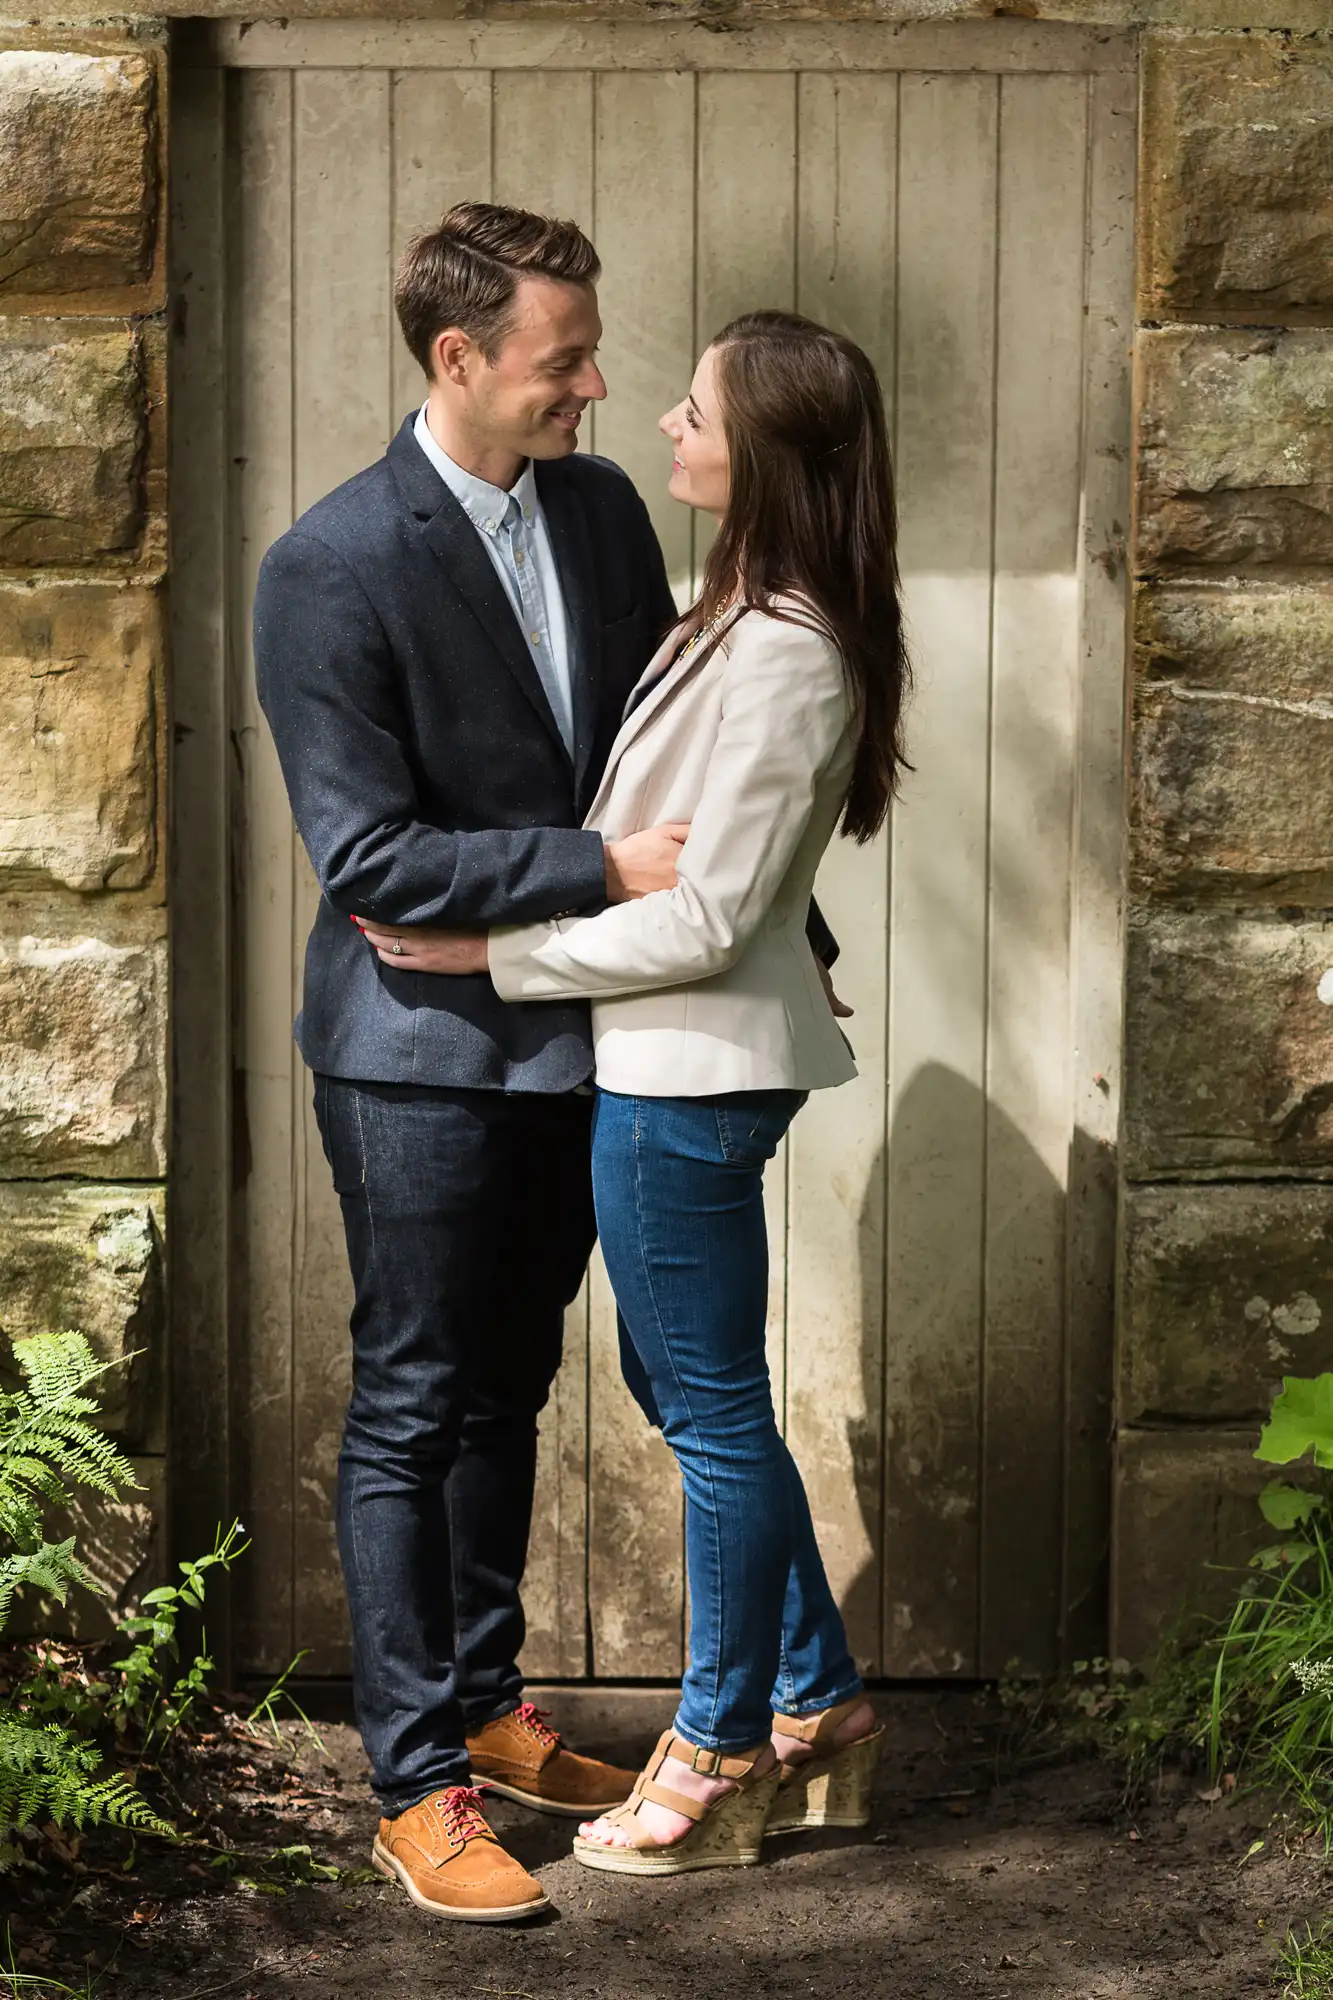 A couple gazing affectionately at each other, standing by a stone wall and wooden door, the man in a suit and the woman in a blazer and jeans.